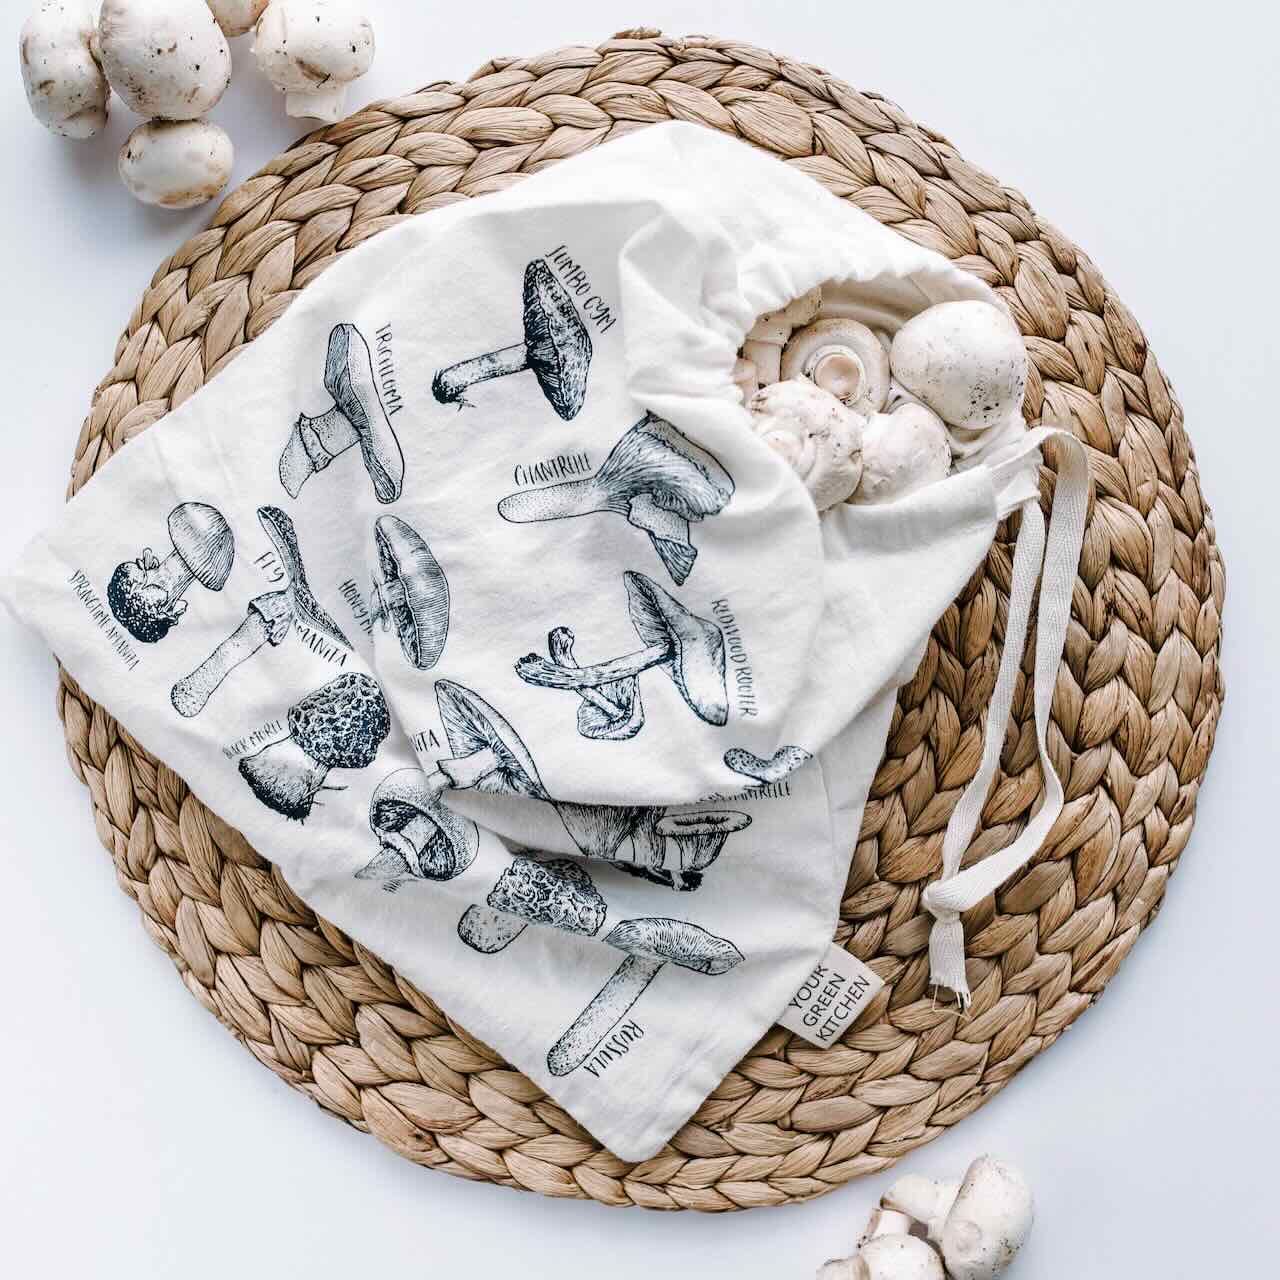 A produce bag with varietal of mushroom patterns laying flat on a rattan placemat, with mushrooms scattered around it.